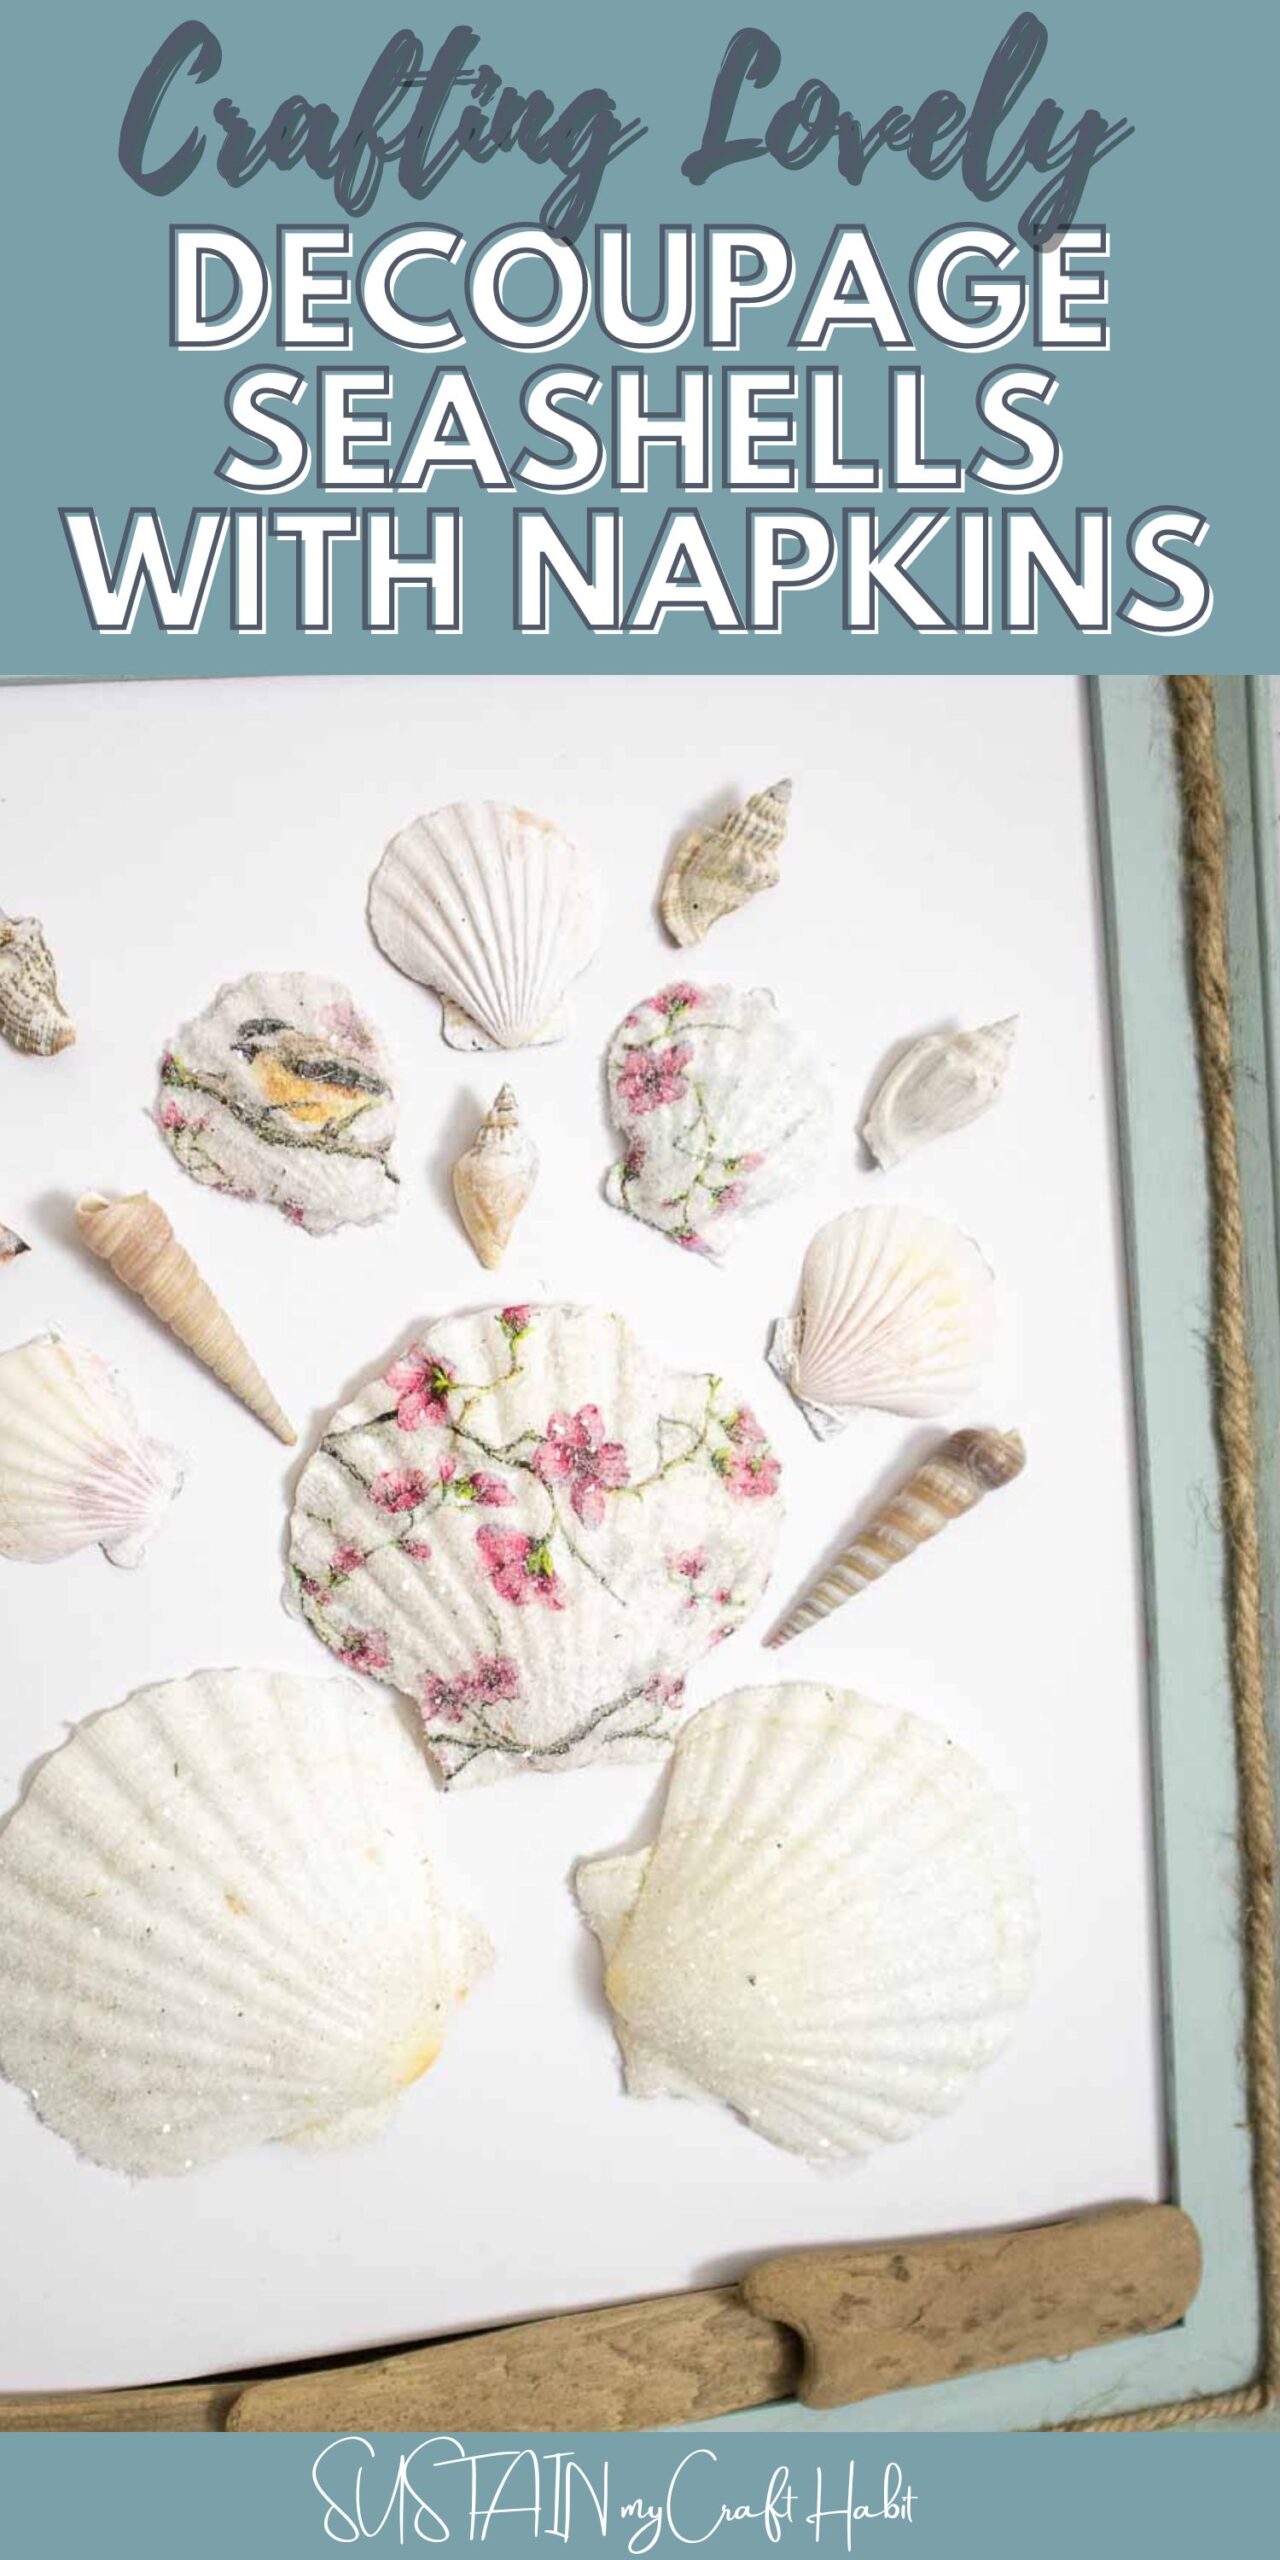 Decoupage seashells using paper napkins and decorated with driftwood, twine on a painted frame with text overlay.